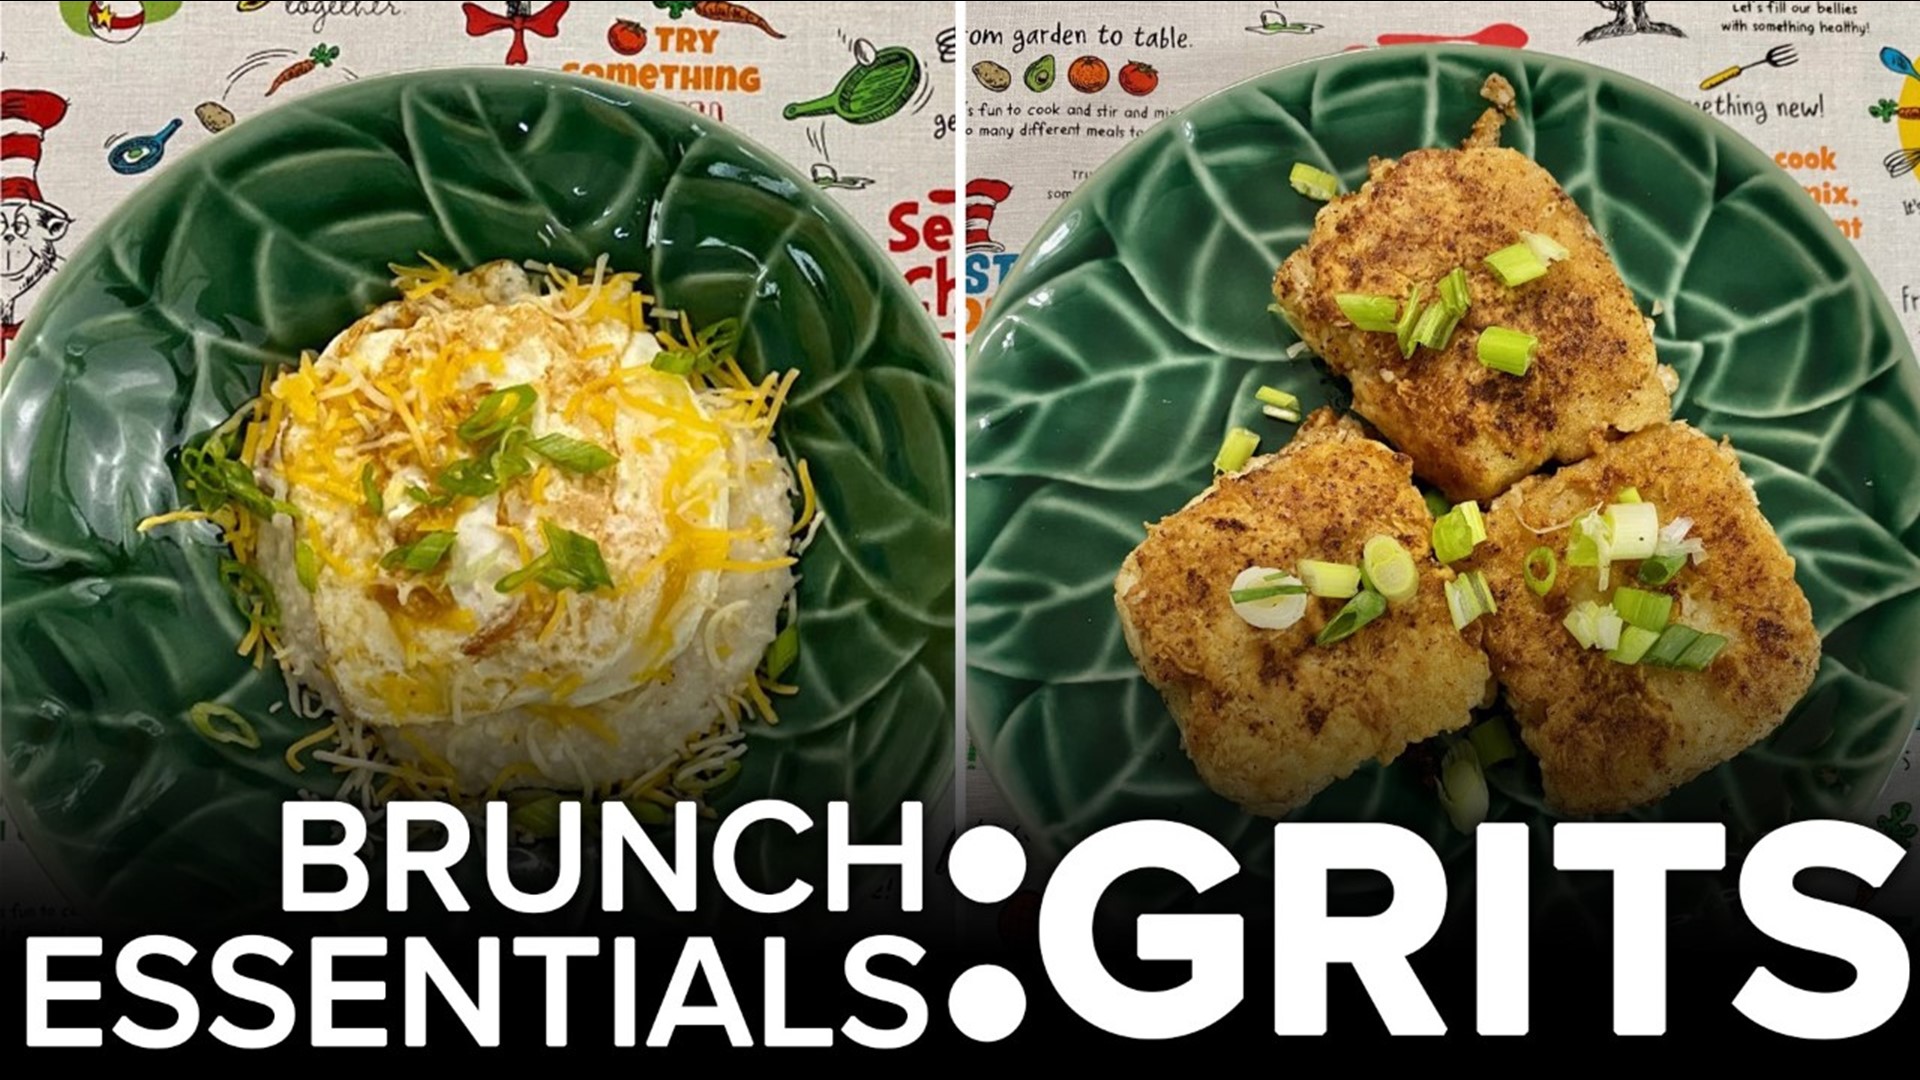 Chef Kevin's recipe for cheesy grits and grit cakes  will convert even the biggest grits hater!